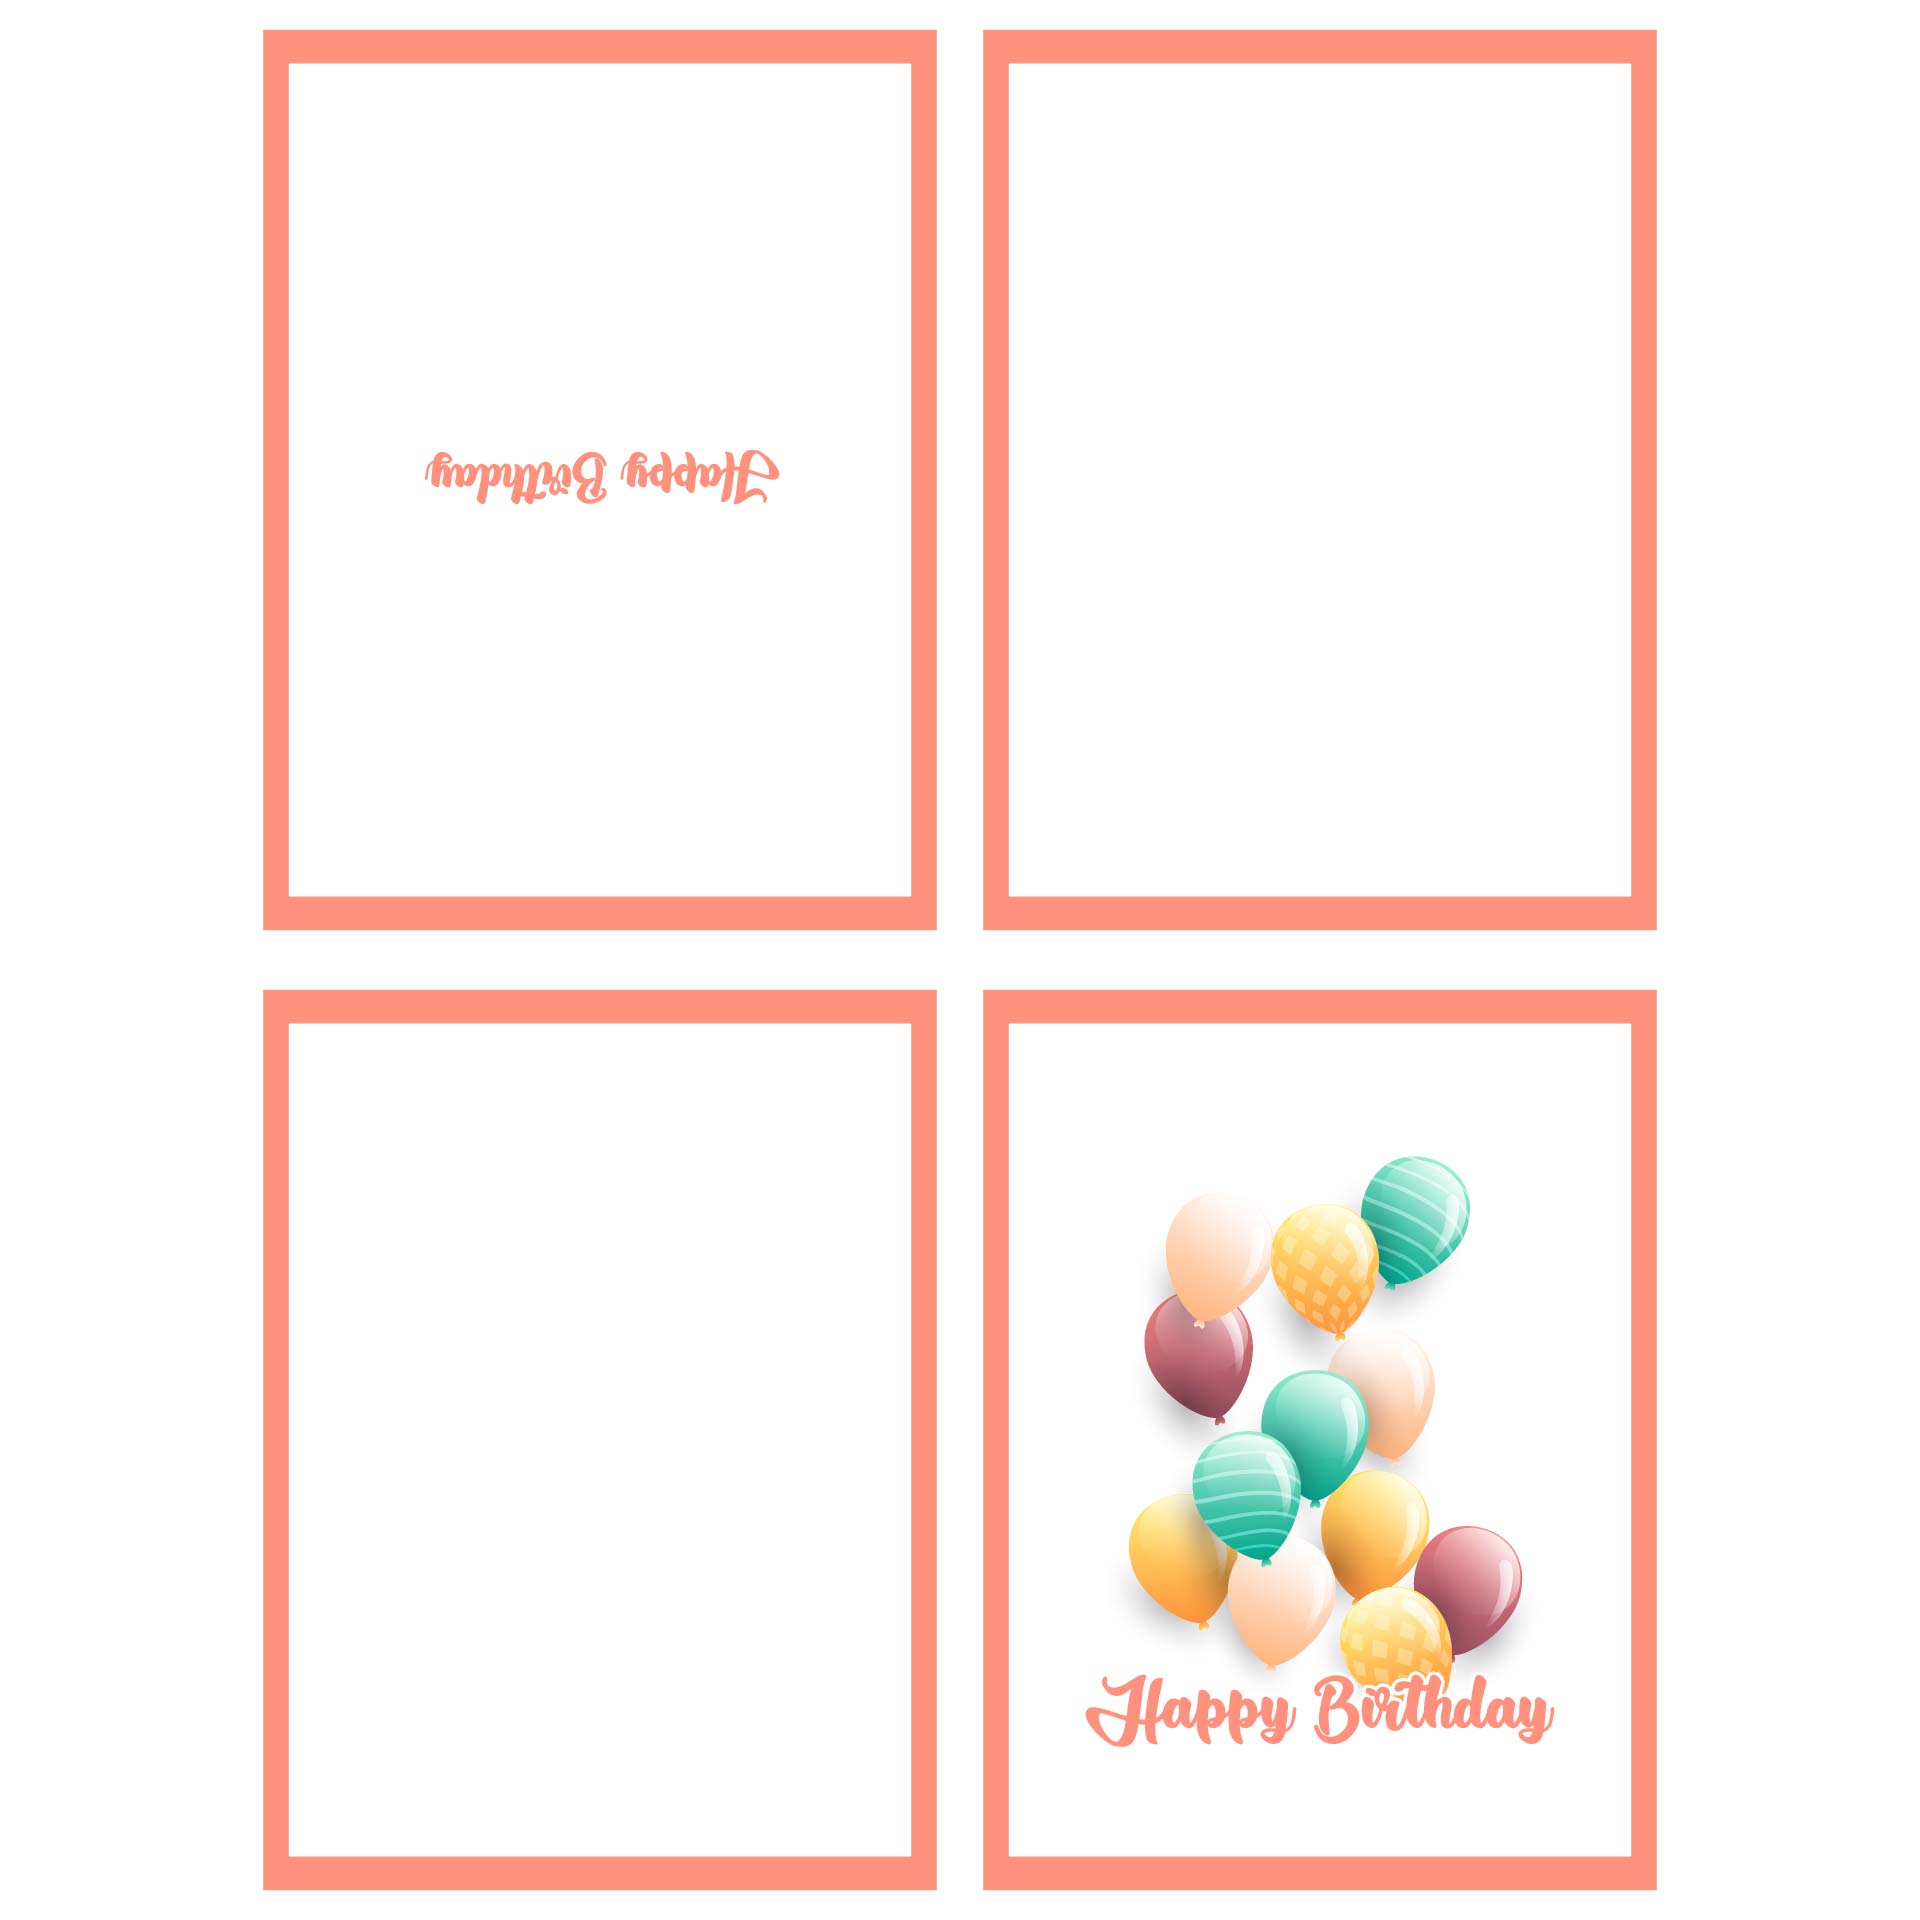 20 Best Printable Folding Birthday Cards For Wife - printablee.com With Quarter Fold Birthday Card Template